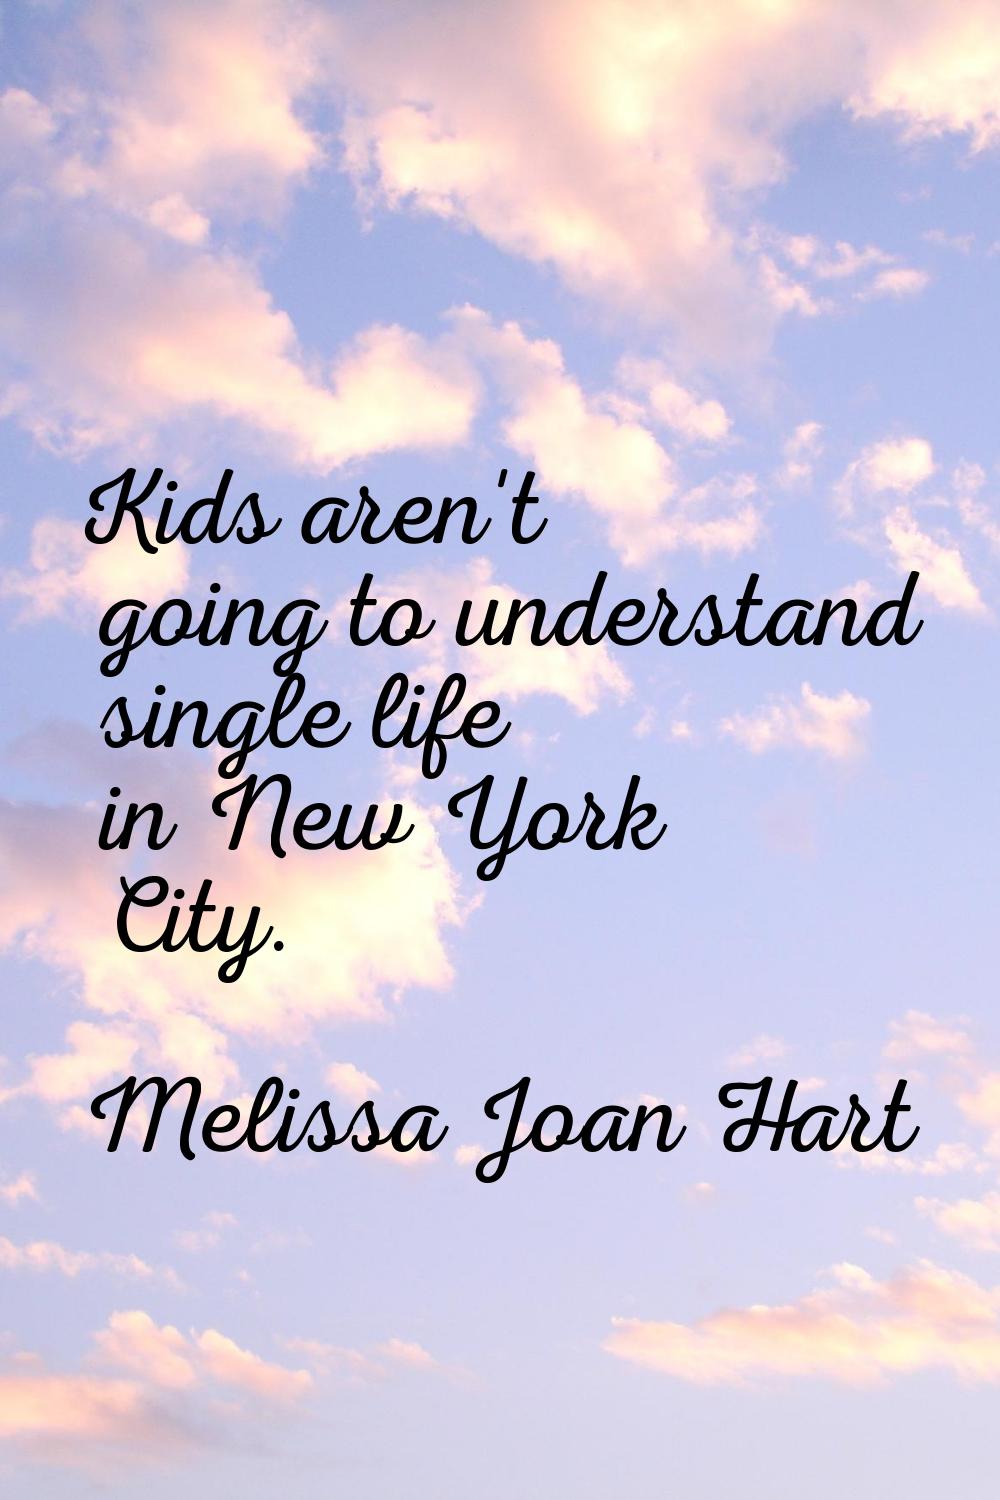 Kids aren't going to understand single life in New York City.